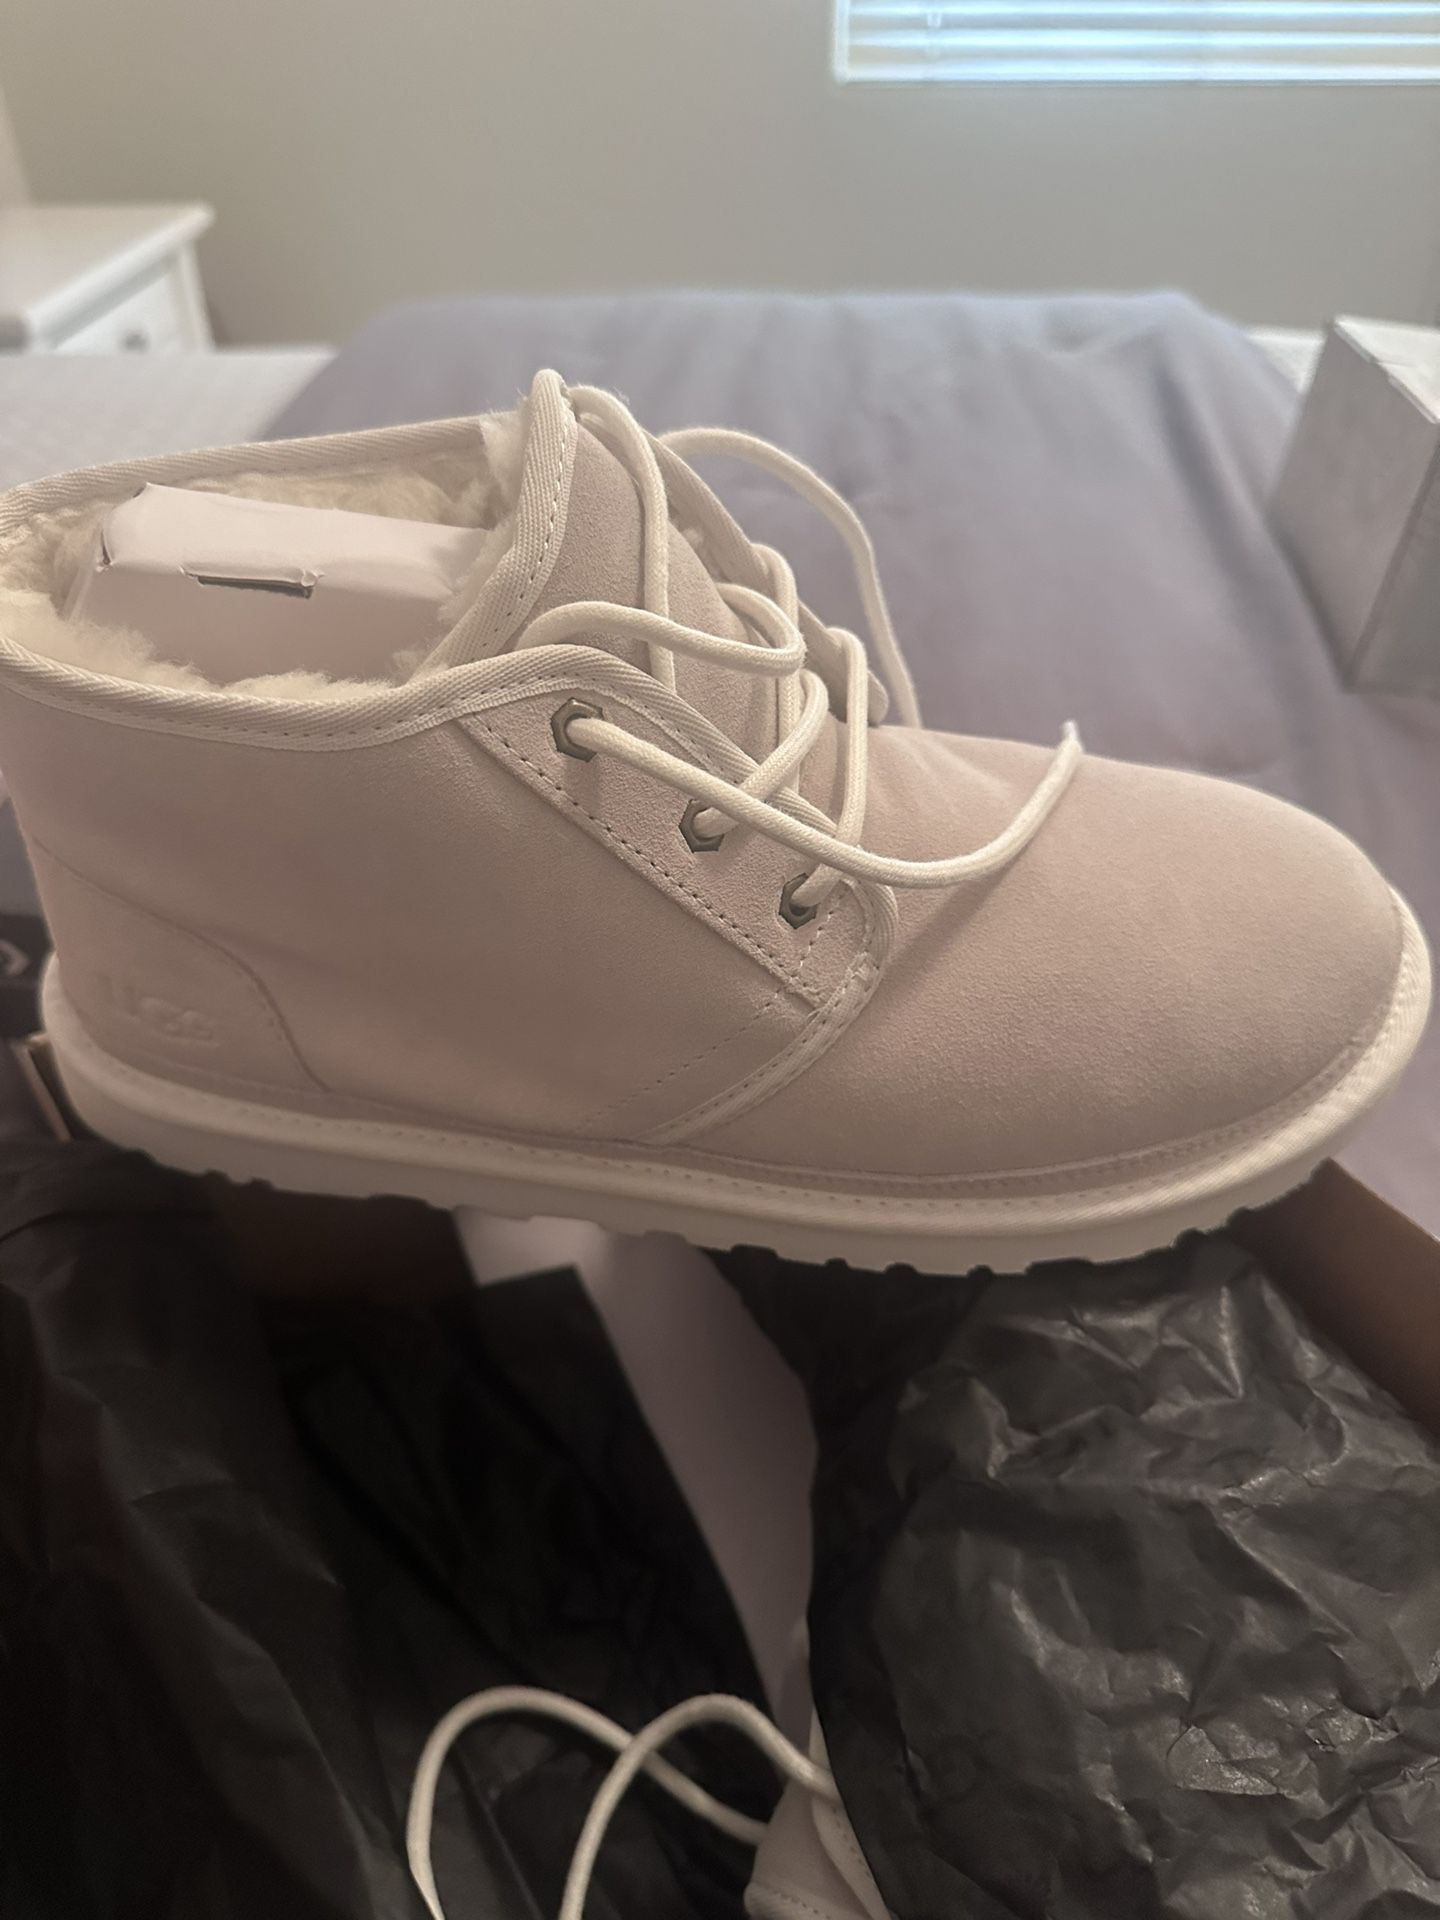 Brand New Ugg Boots Size 11